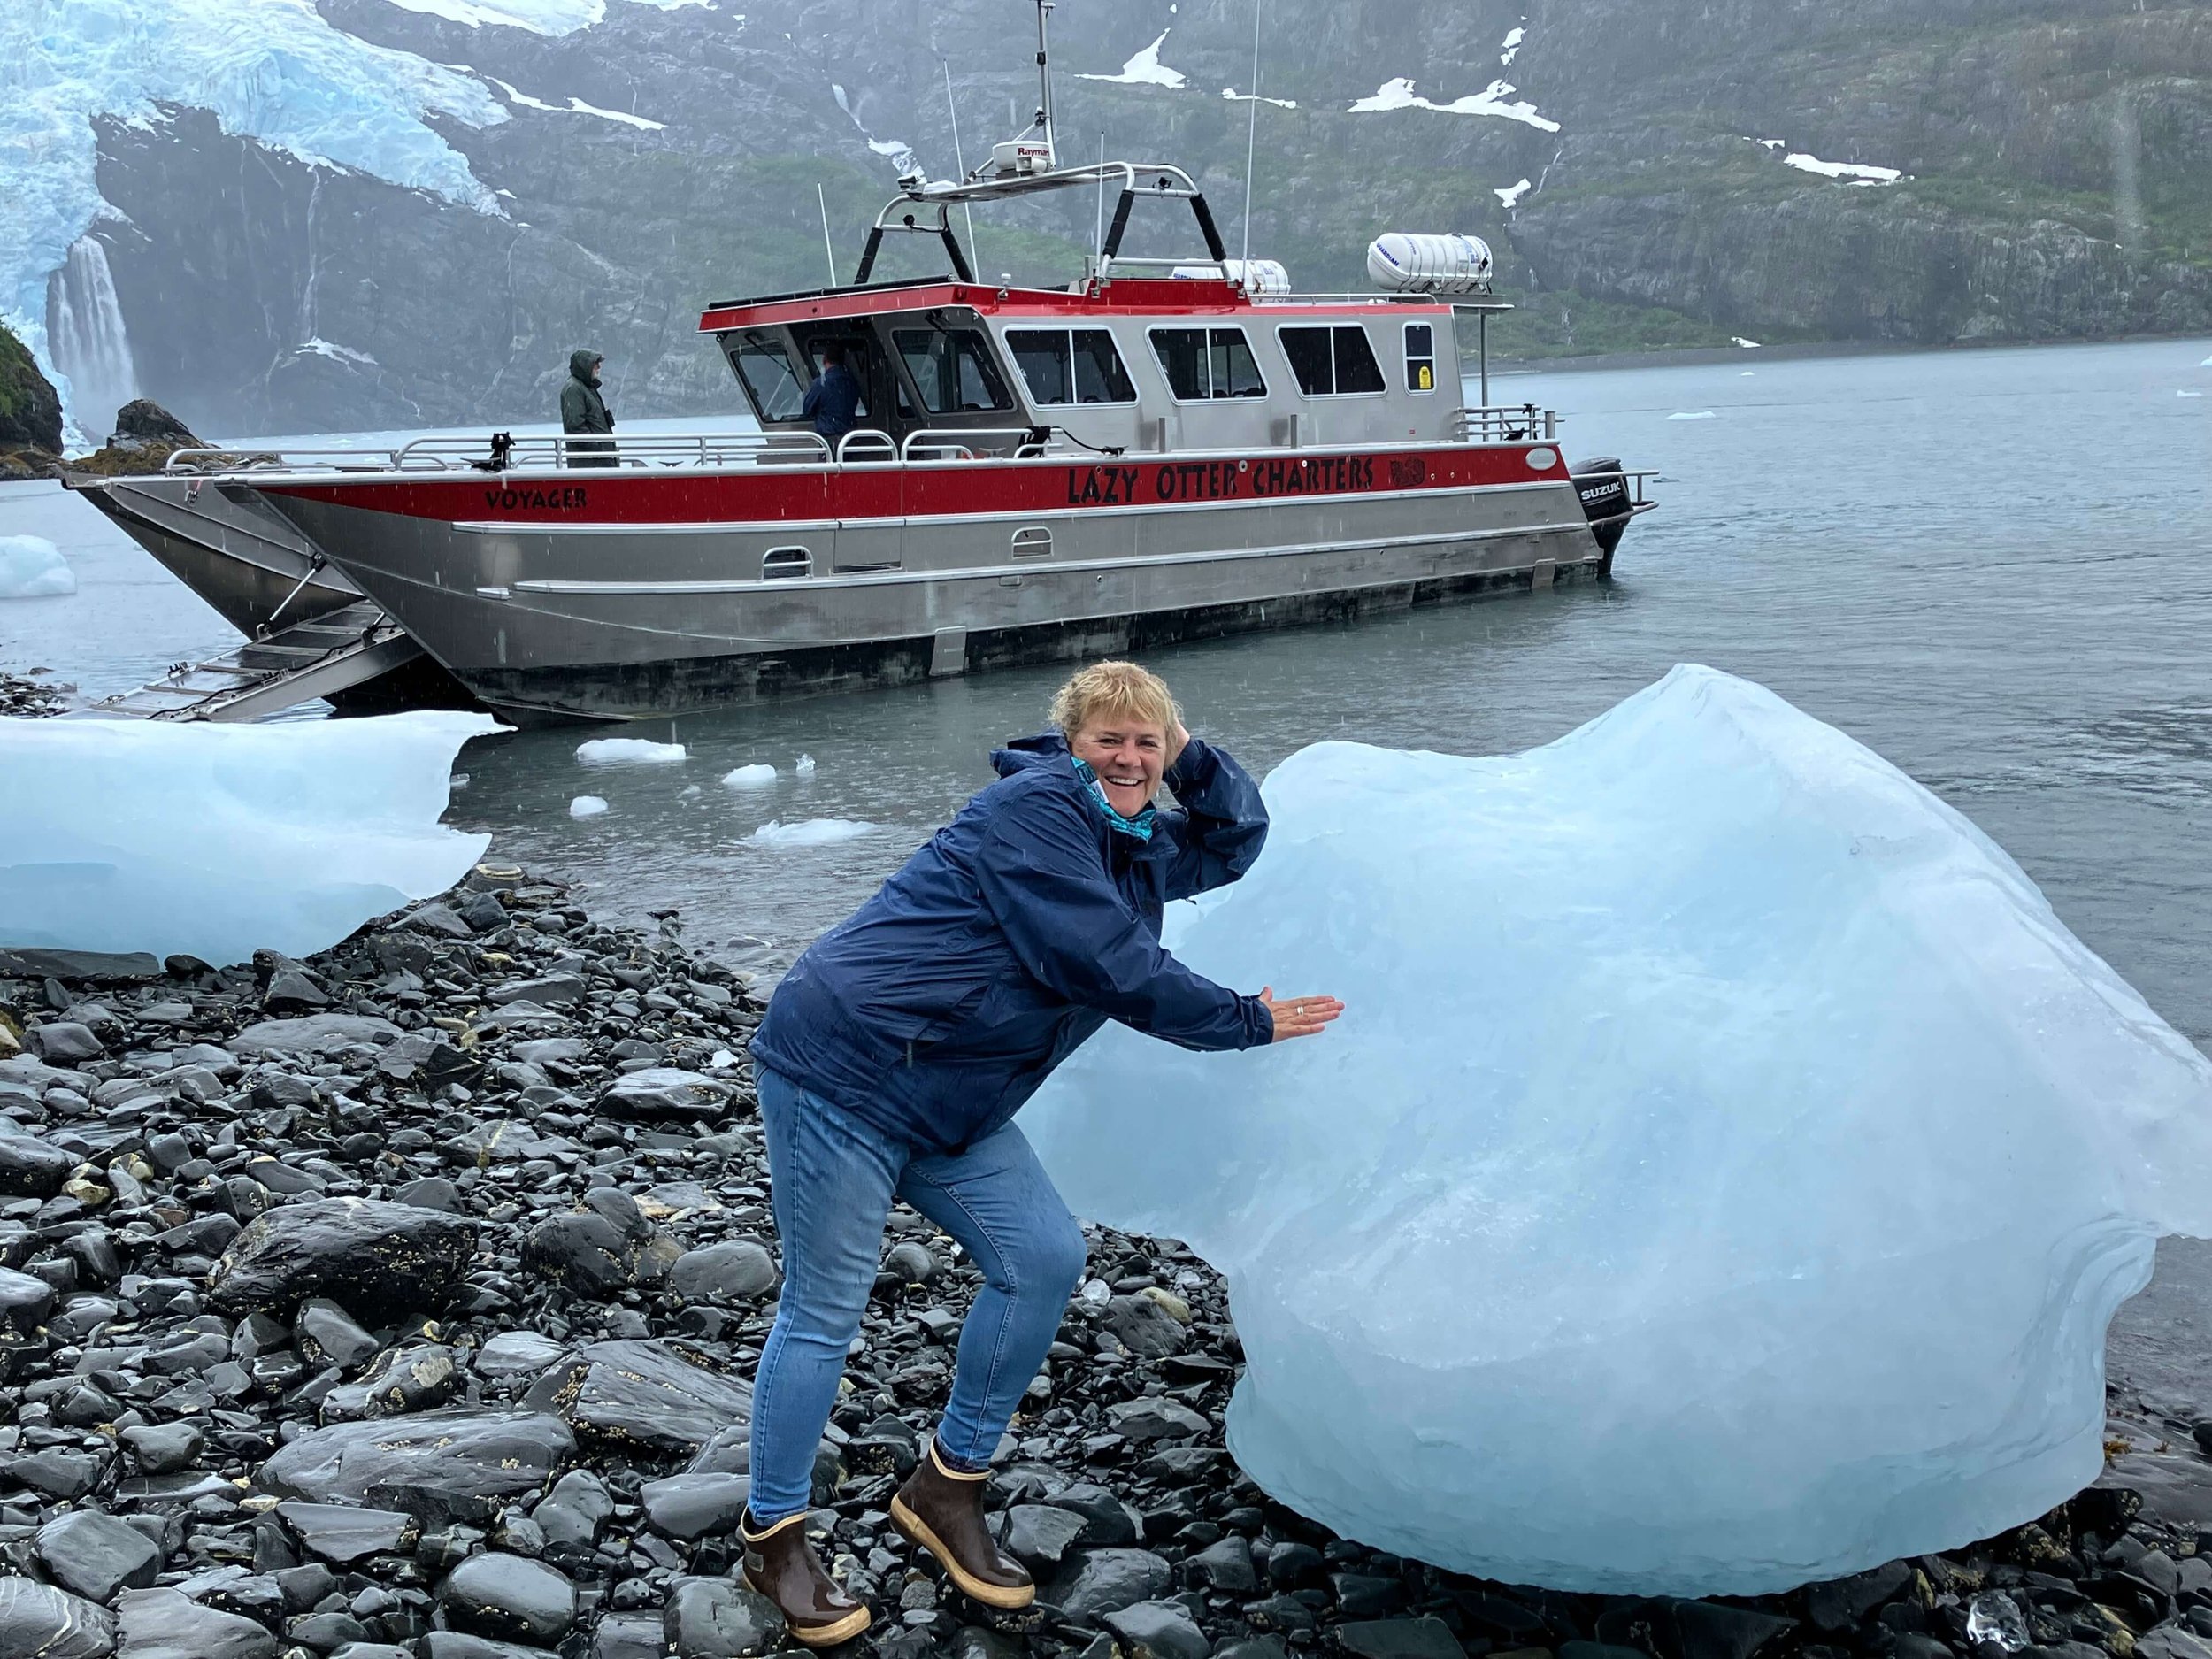  Touching an Ice berg on Lazy Otter Charters Tour 